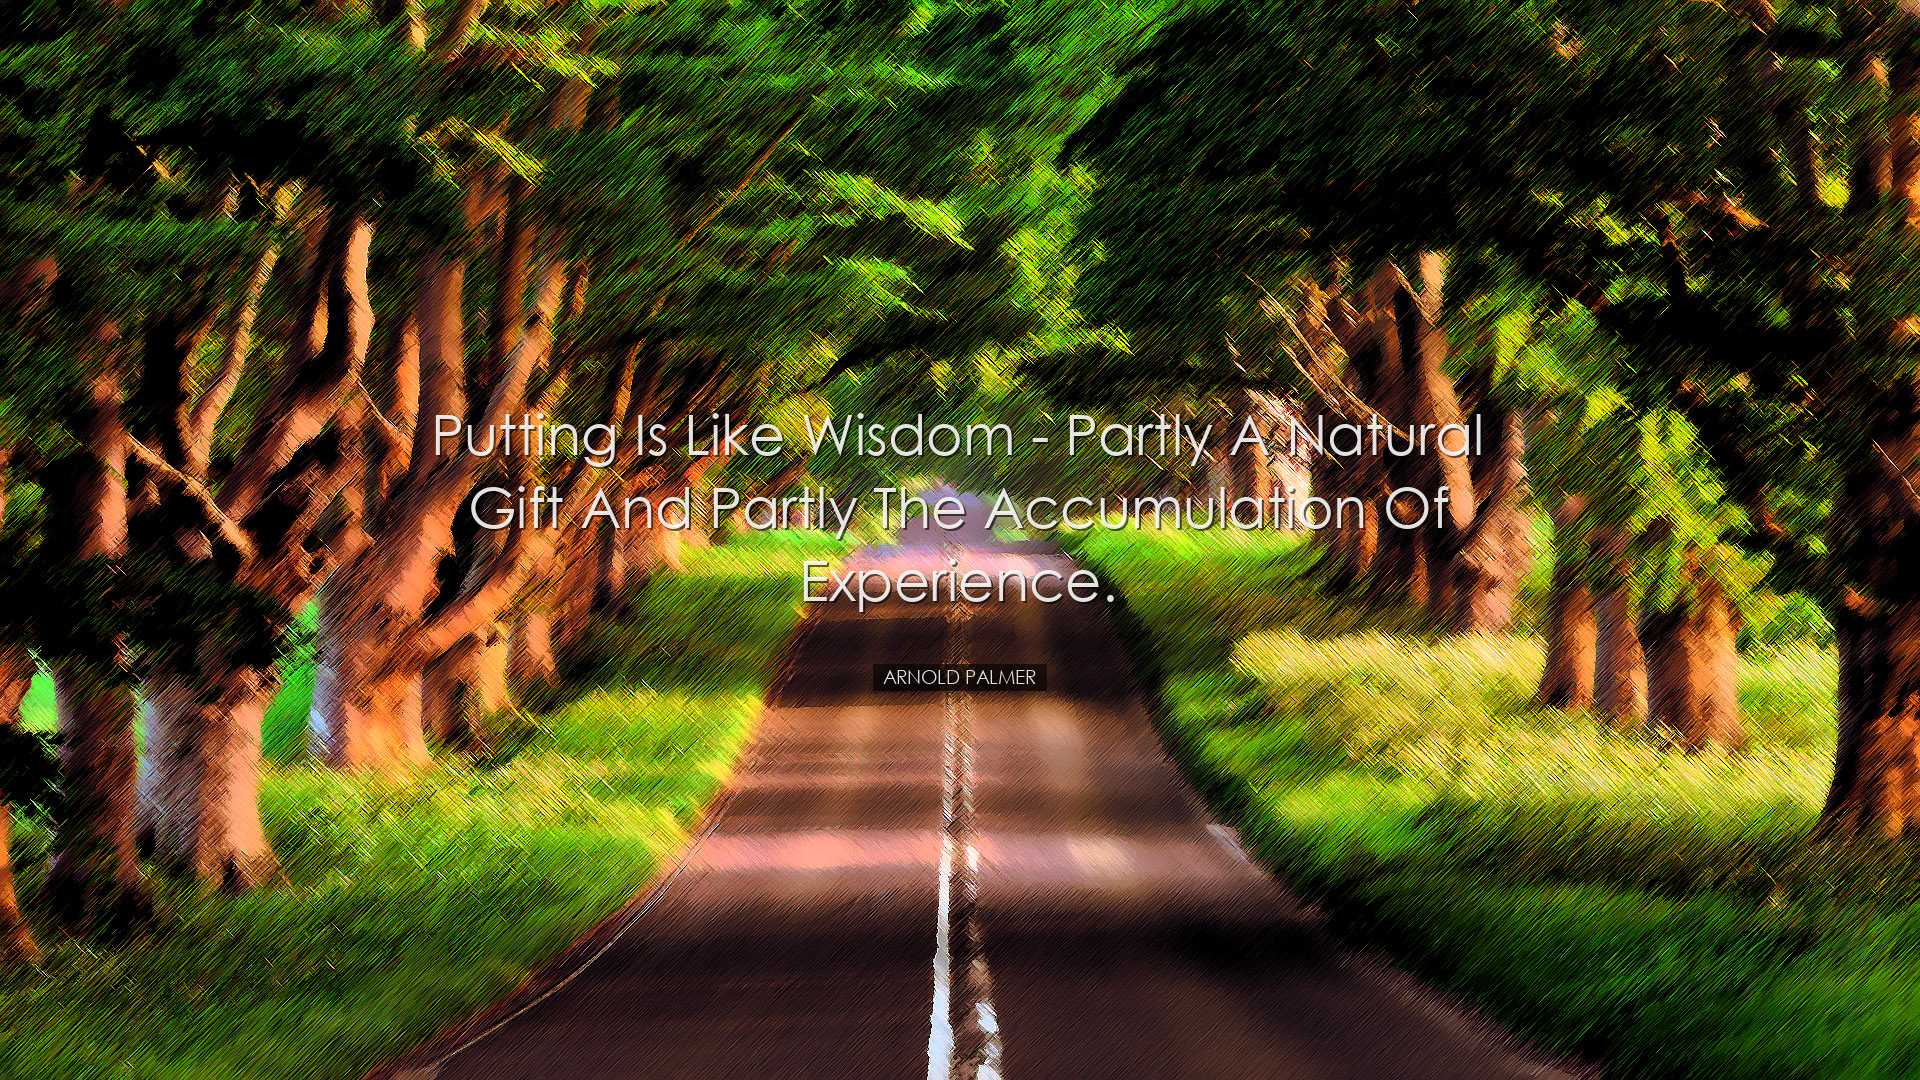 Putting is like wisdom - partly a natural gift and partly the accu